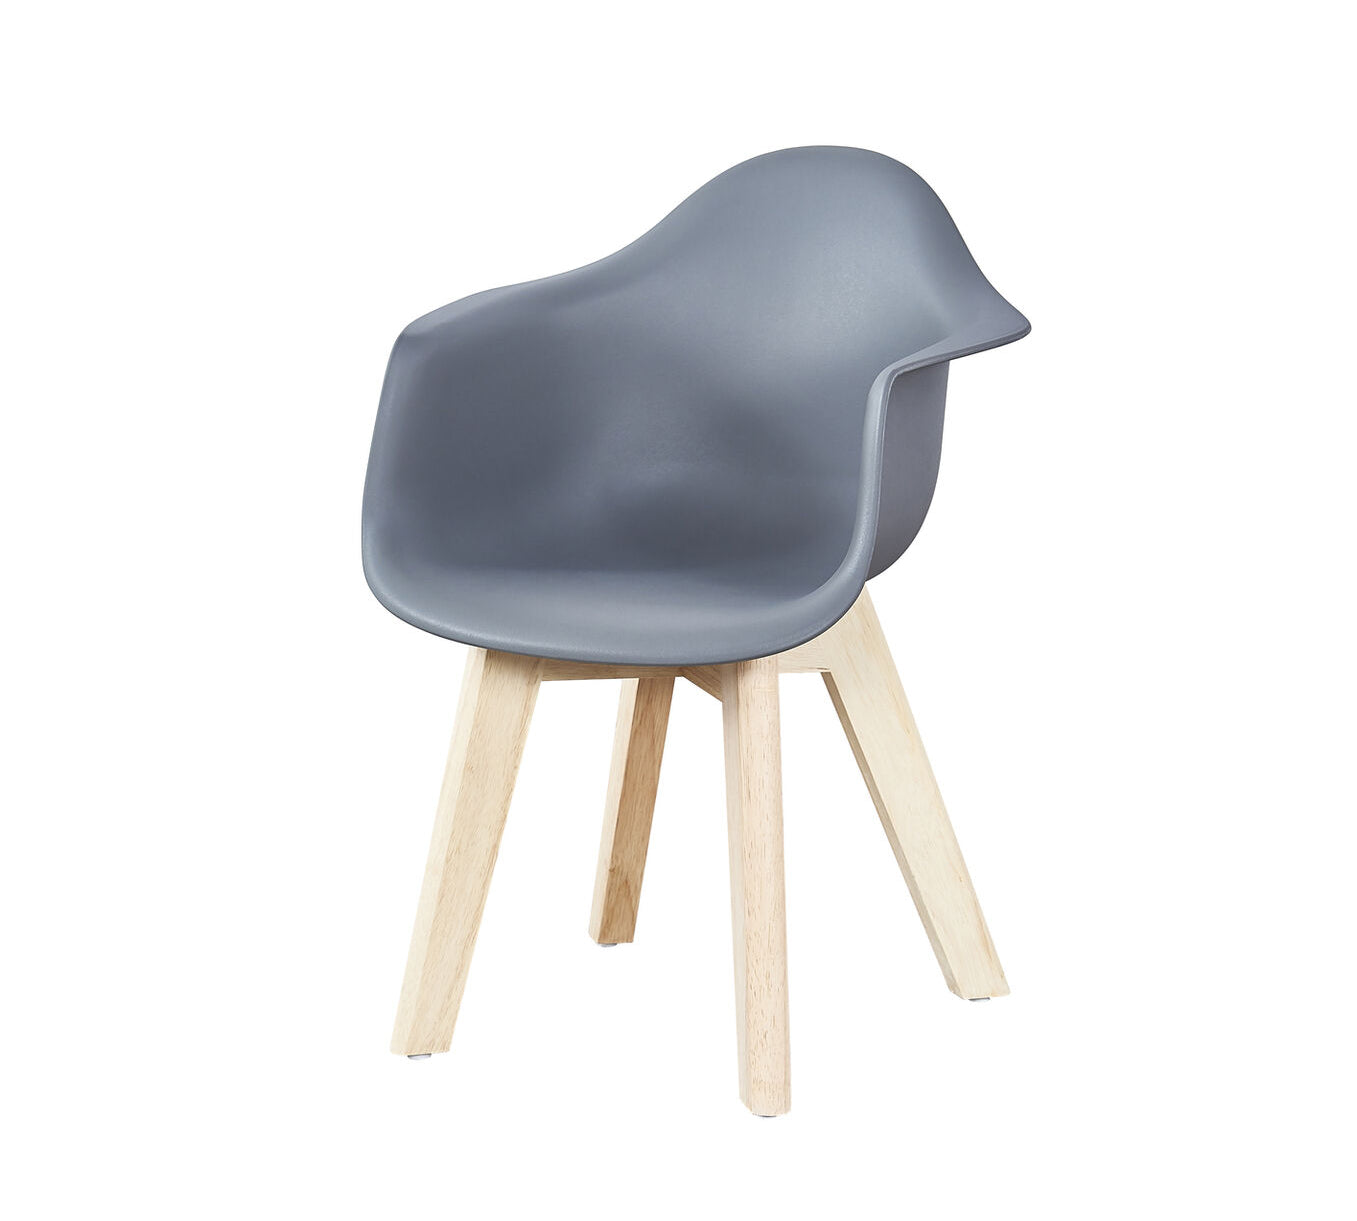 Deer Industries Kids Furniture Singapore, Quax Singapore, European Kids Furniture, Grey Kids Chair with Matching Grey Play Table